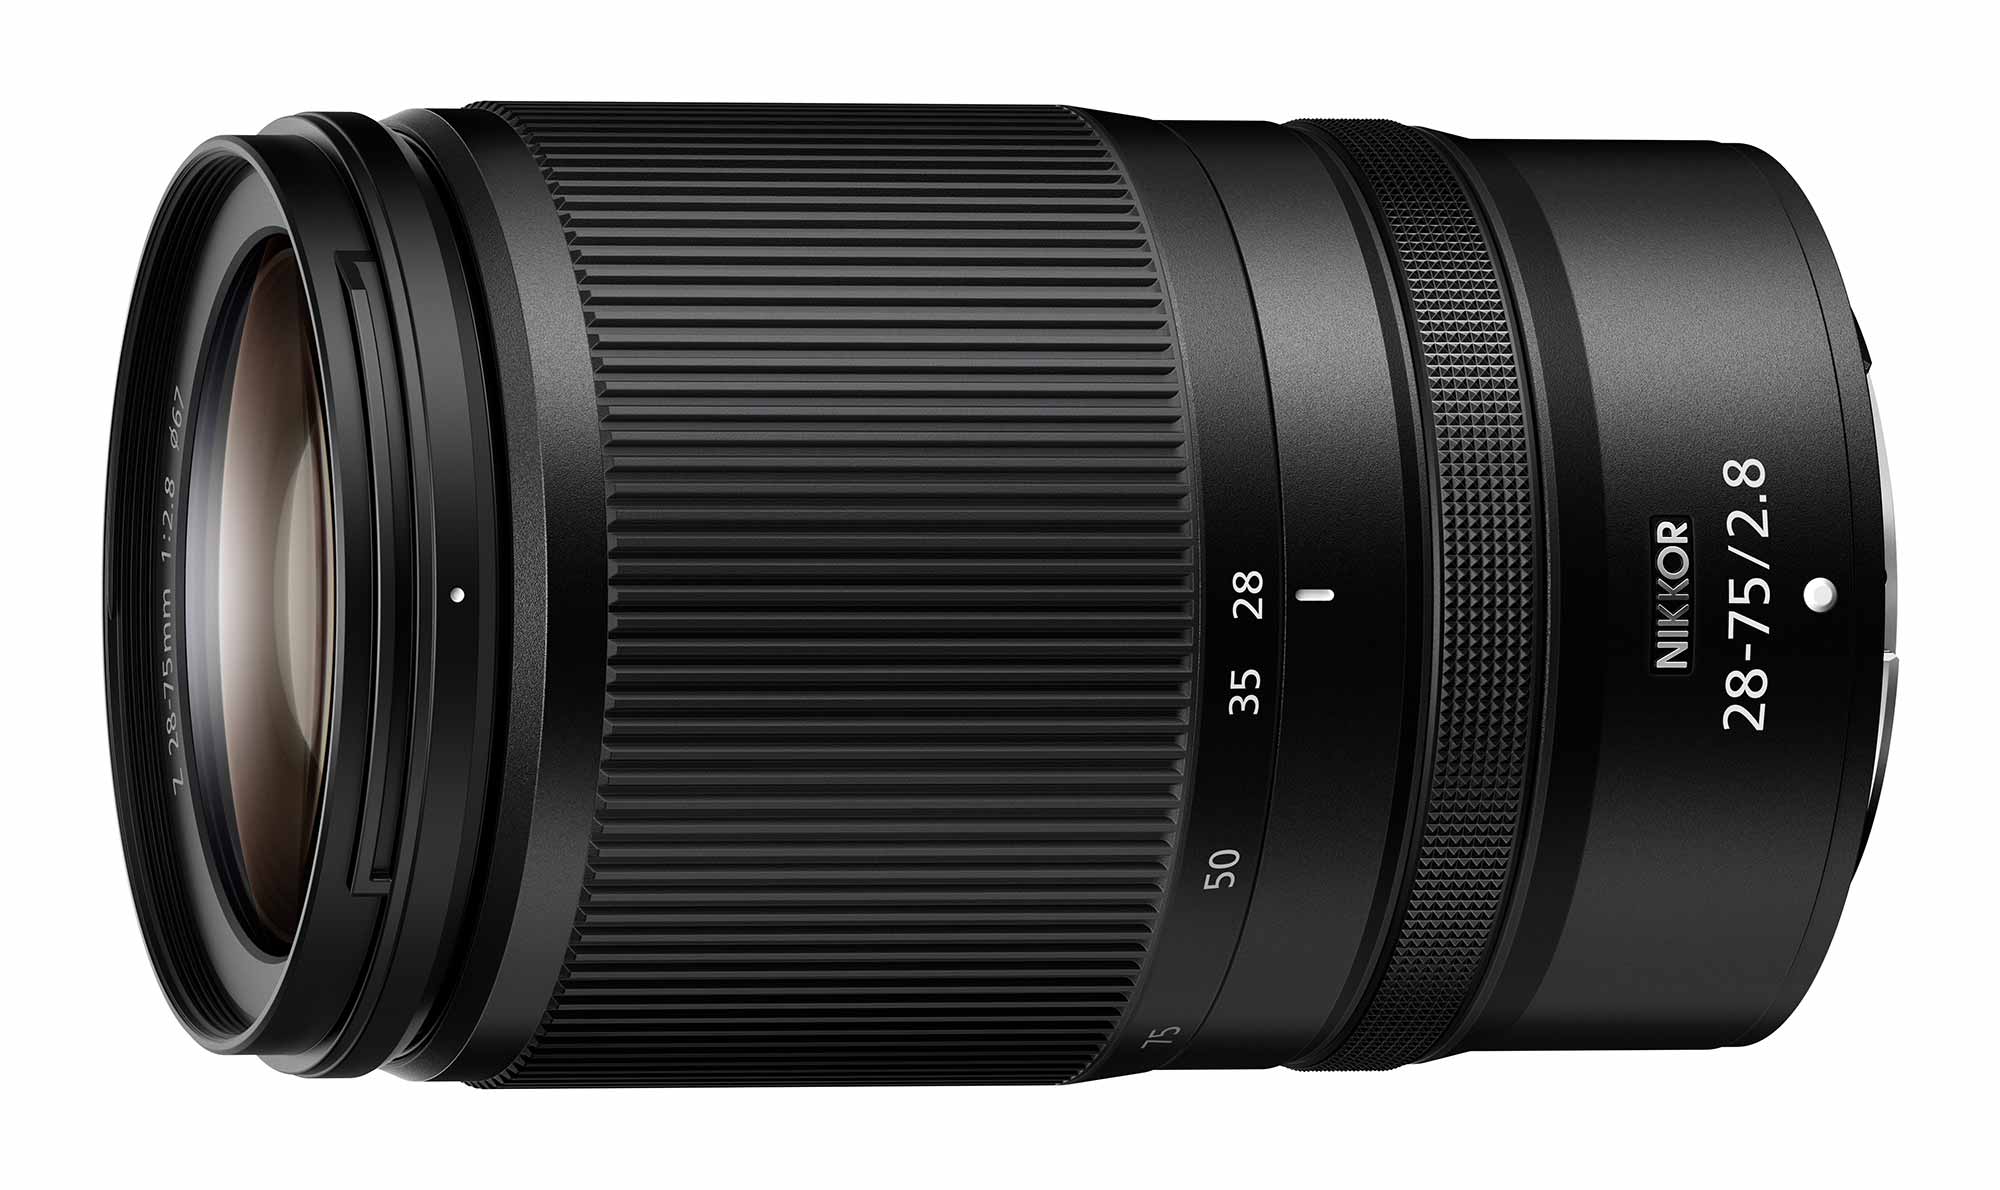 Nikon introduces low-cost NIKKOR Z 28-75 mm f/2.8 full-frame zoom